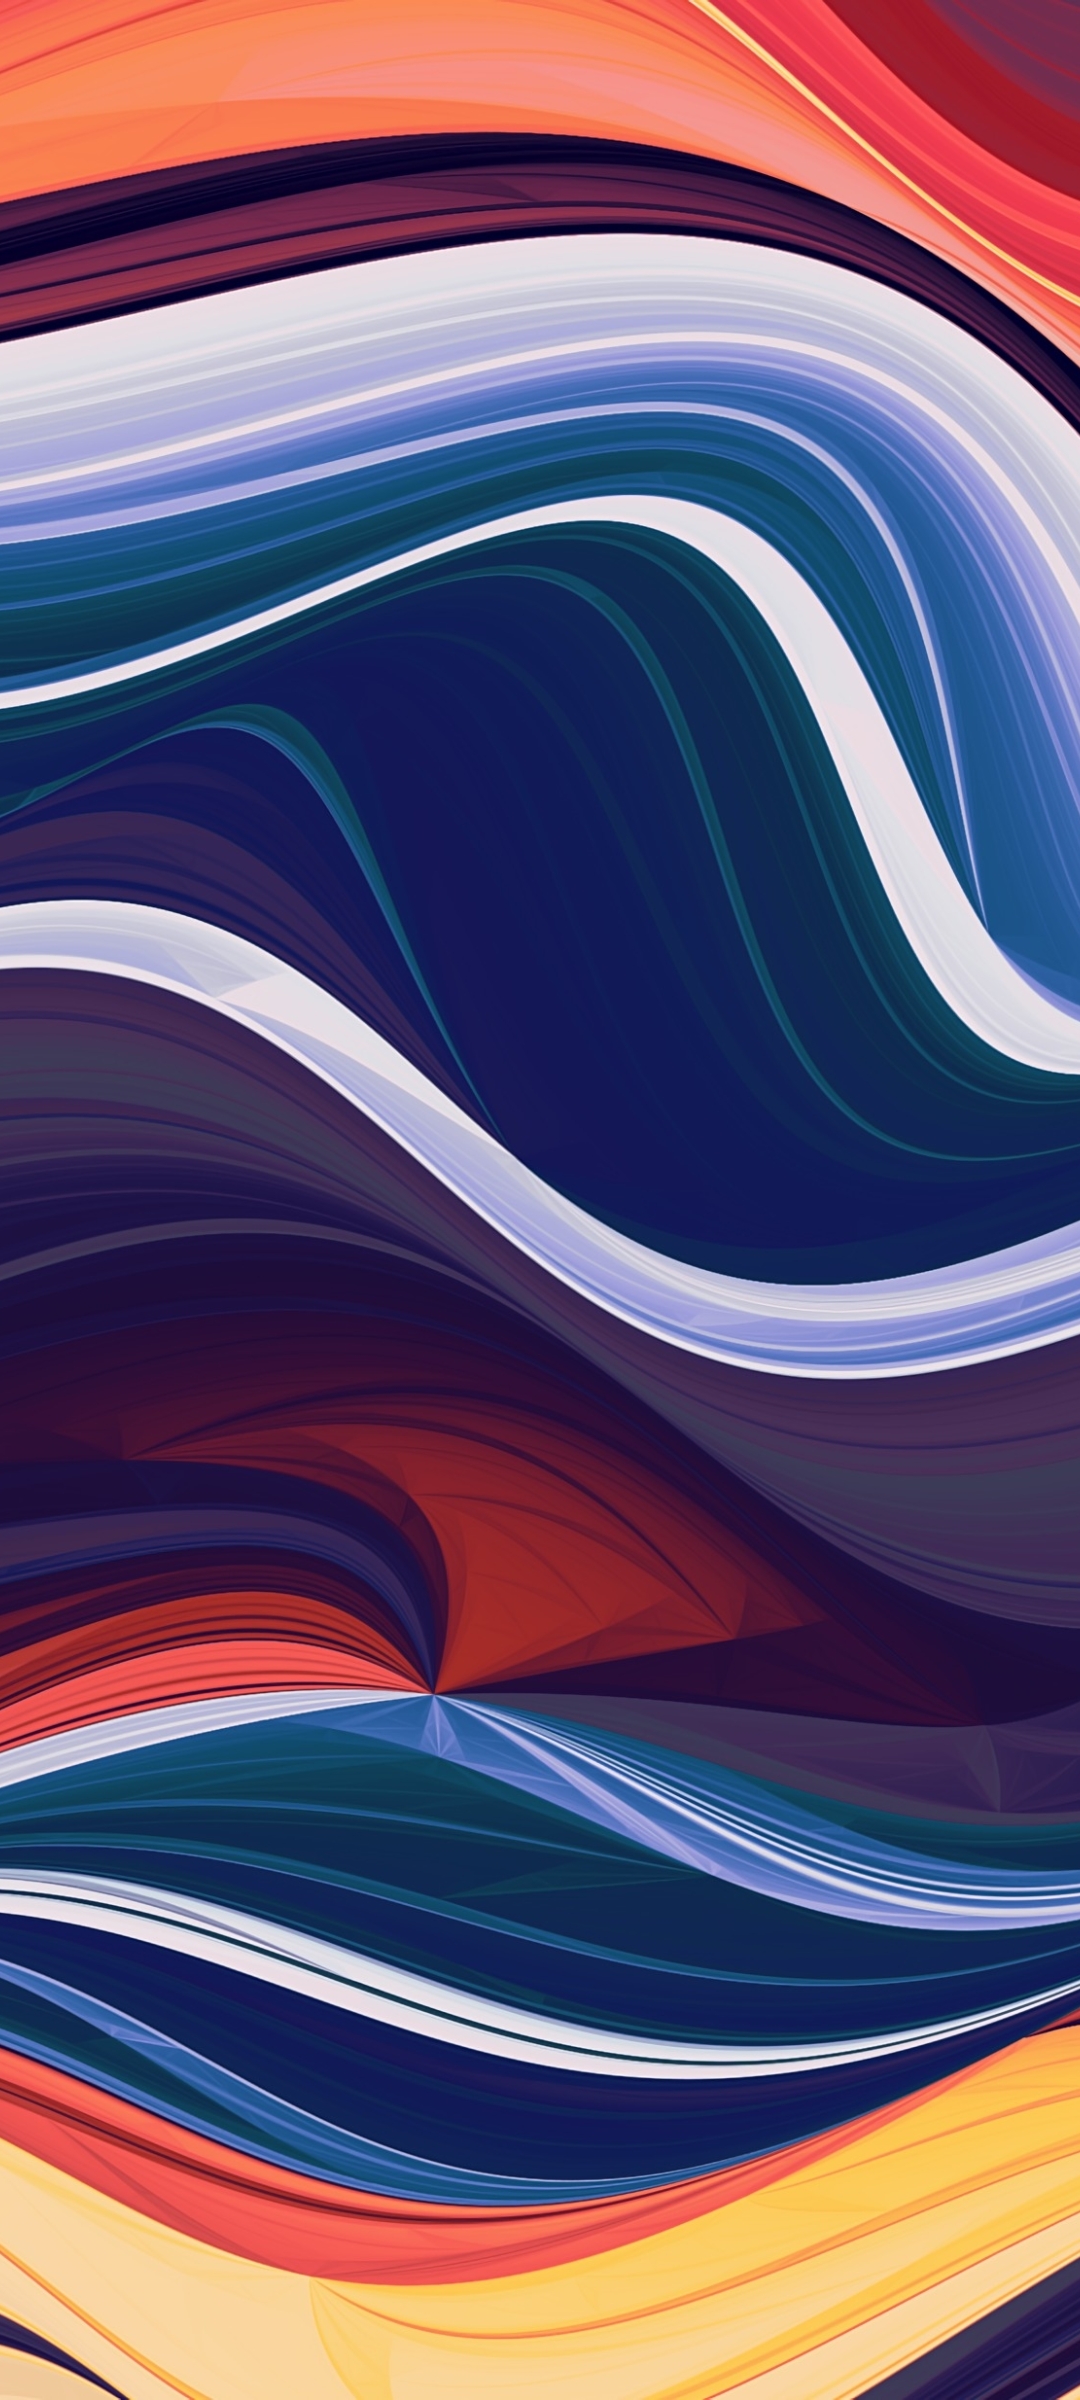 1080x2400 Wave Of Abstract Colors 1080x2400 Resolution Wallpaper Hd